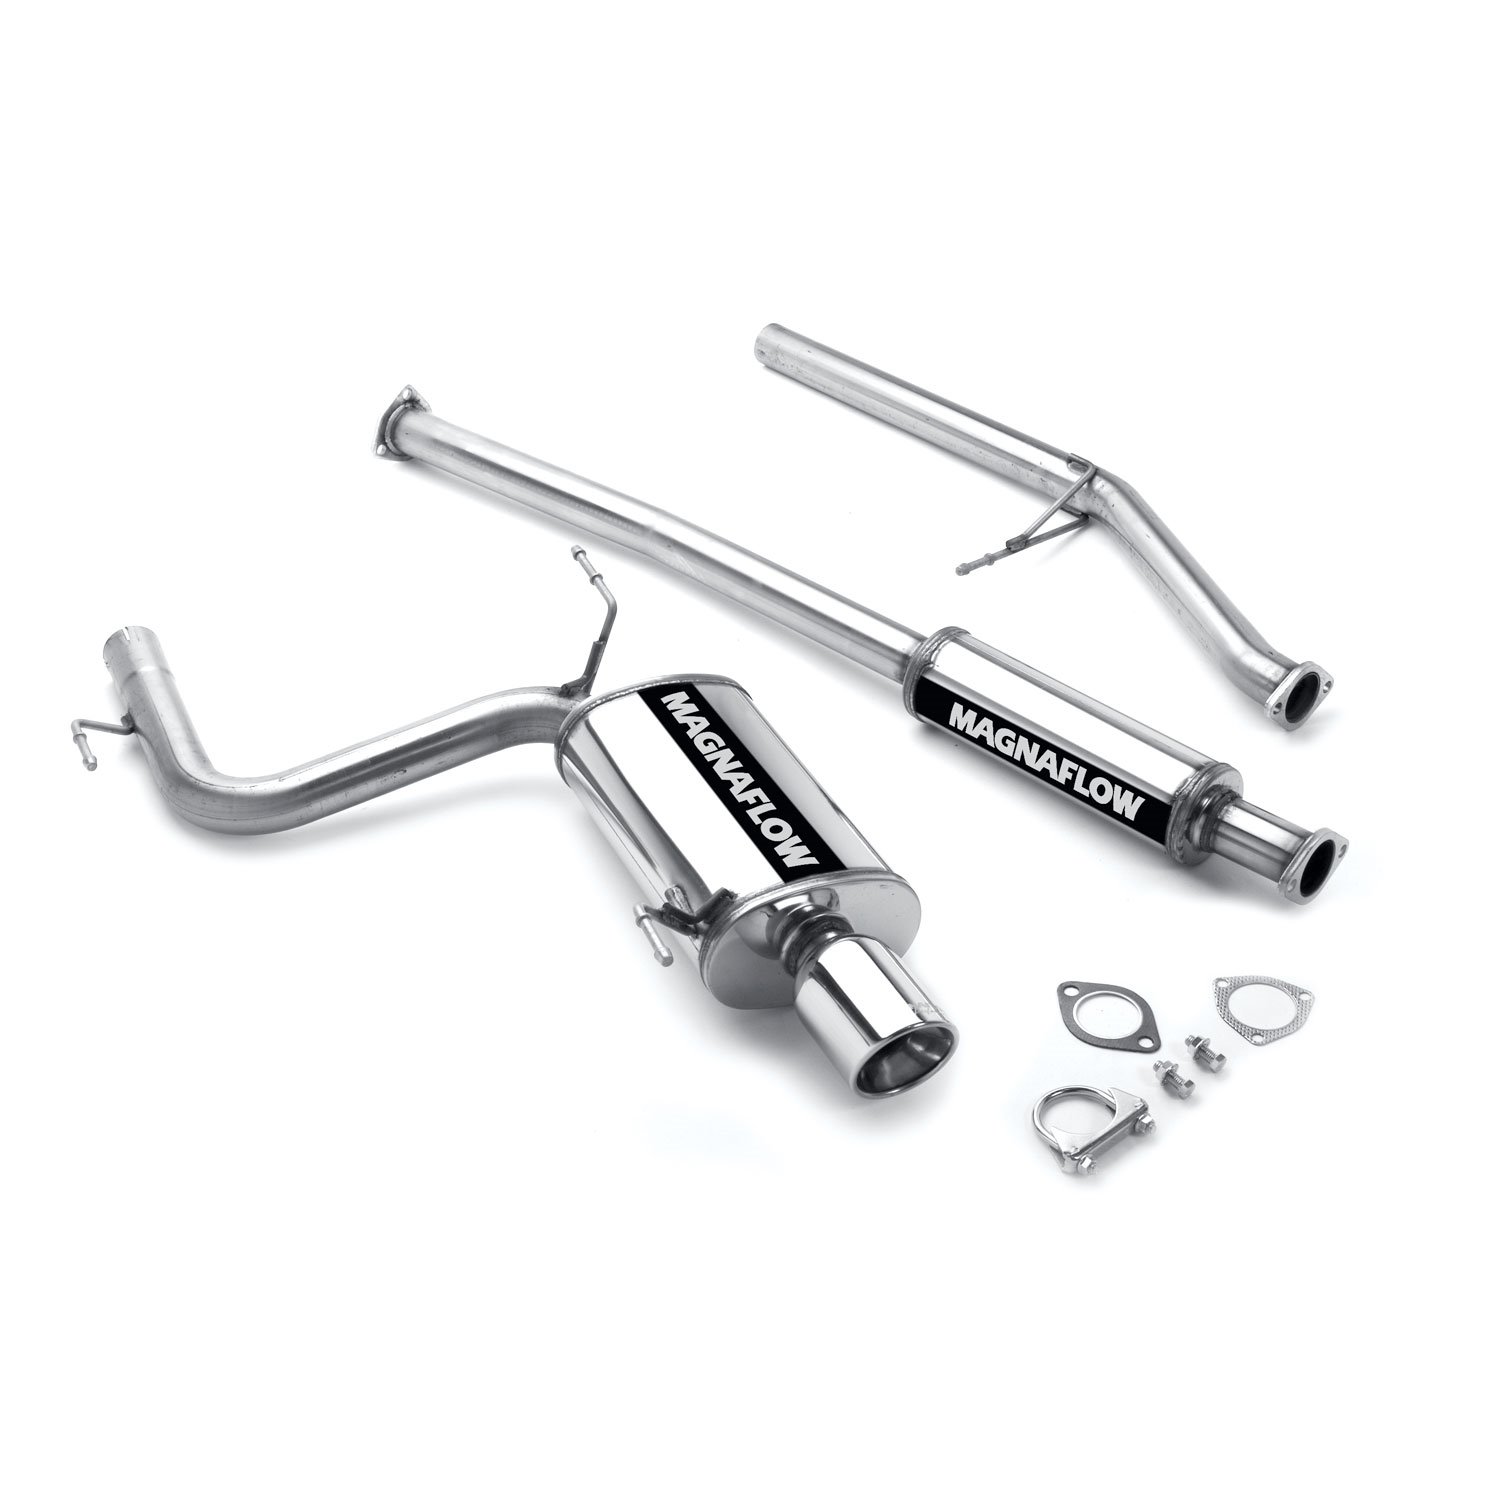 Flow Acura on Magnaflow 15647 Magnaflow Acura Honda Exhaust Systems   Free Shipping